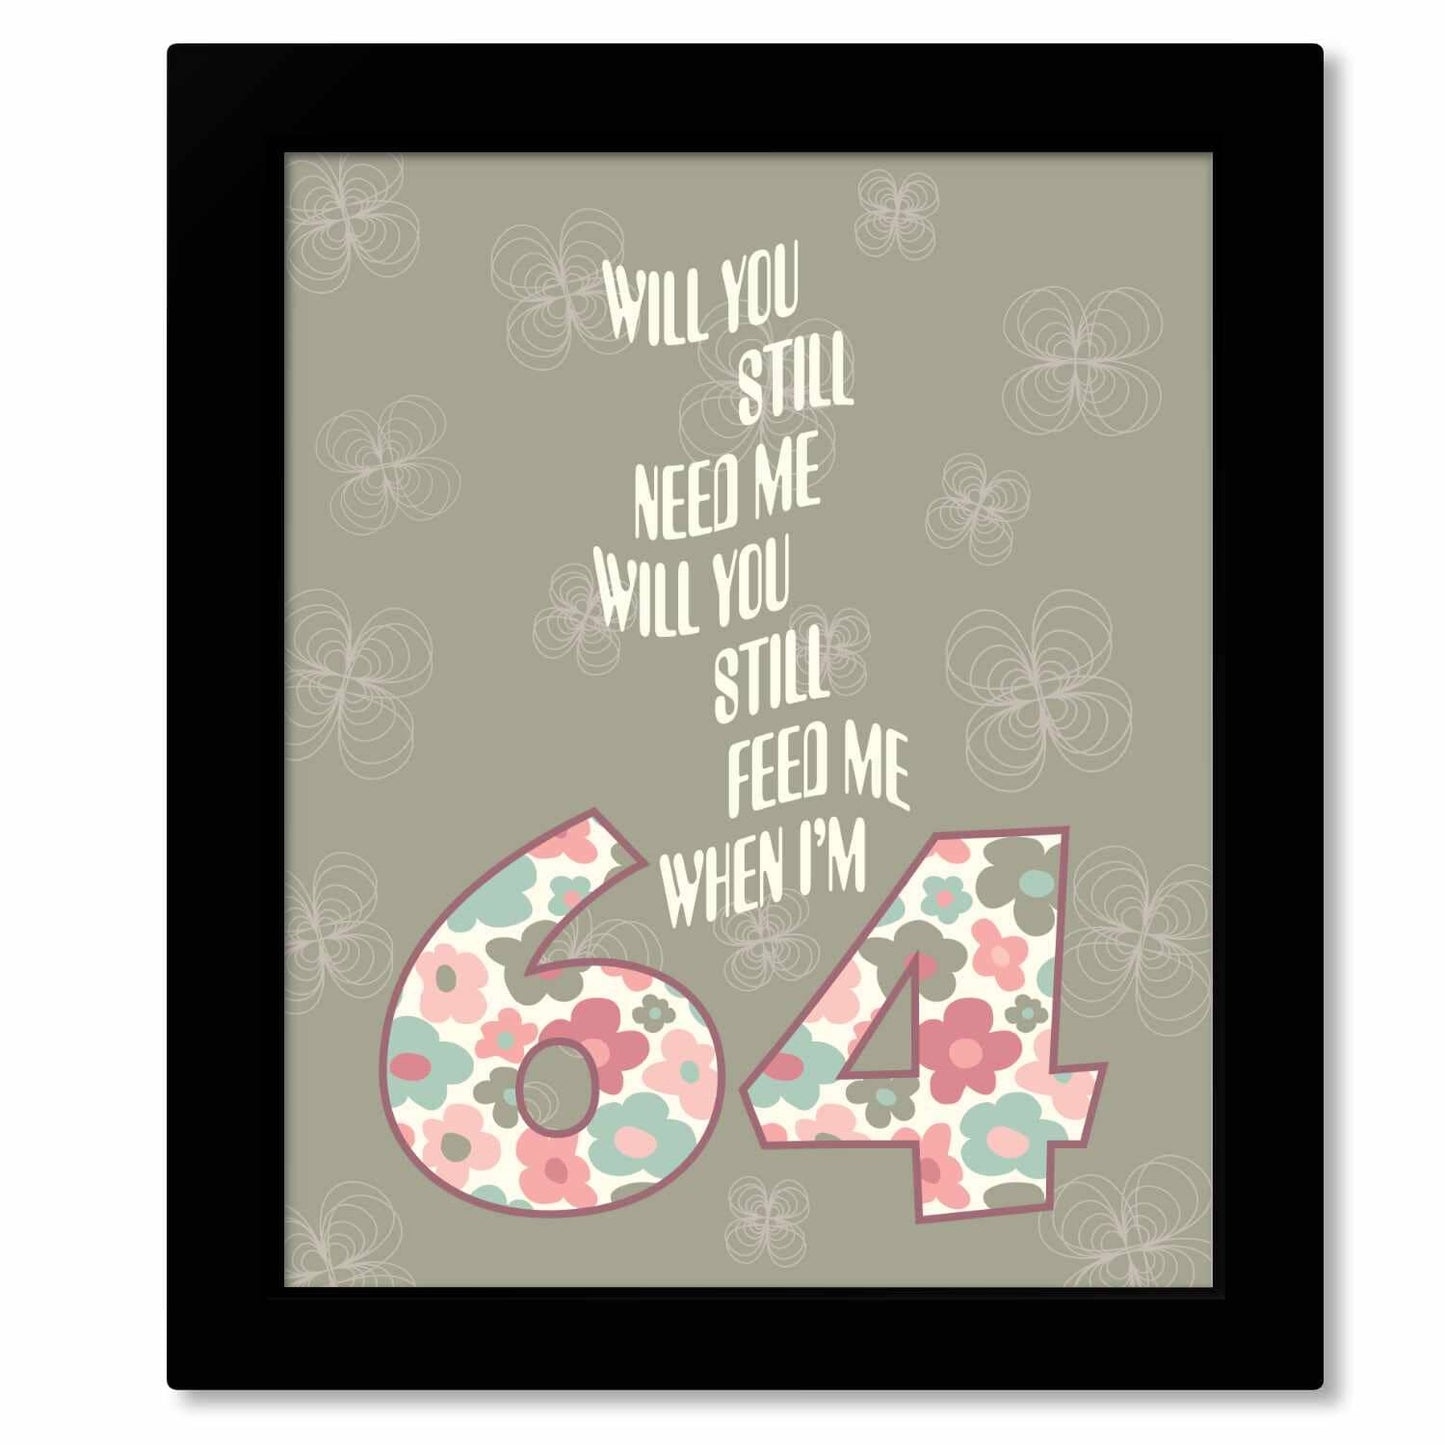 When I'm Sixty-Four 64 by the Beatles - Song Lyric Art Print Song Lyrics Art Song Lyrics Art 8x10 Framed Print (without mat) 